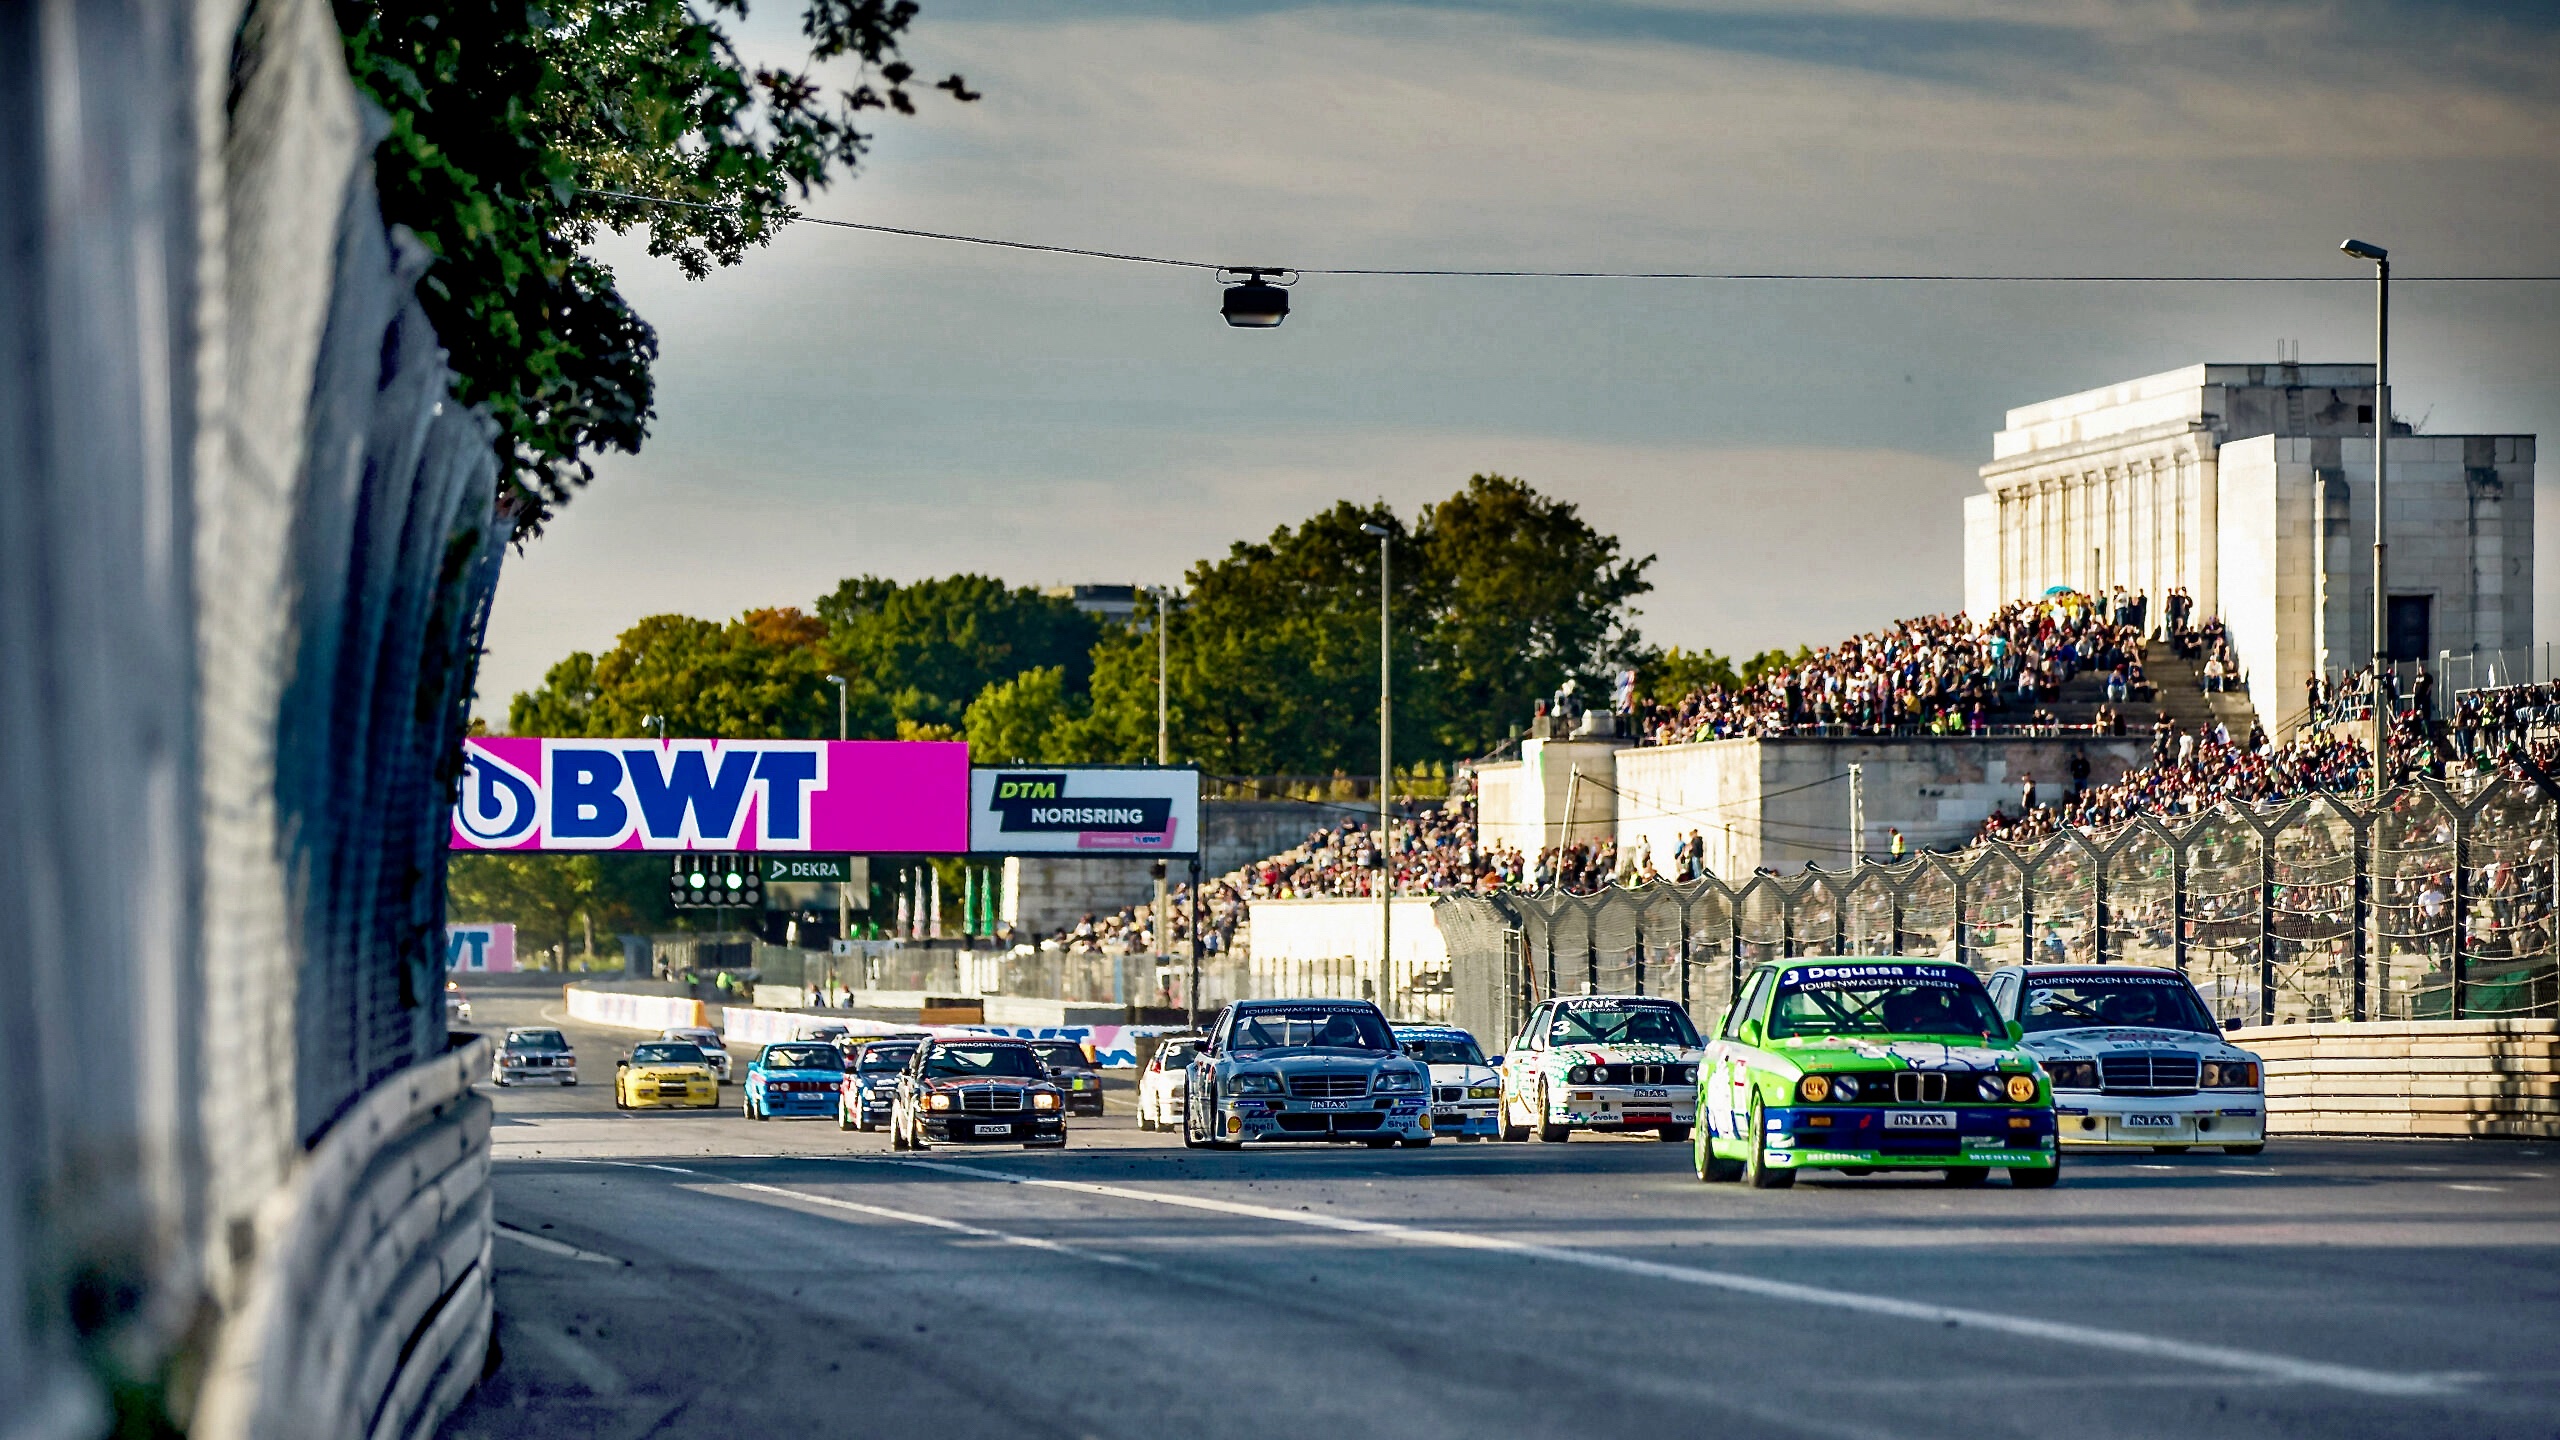 Preview to the International ADAC Norisring Speedweekend: Nuremberg Festival – with a star, please!